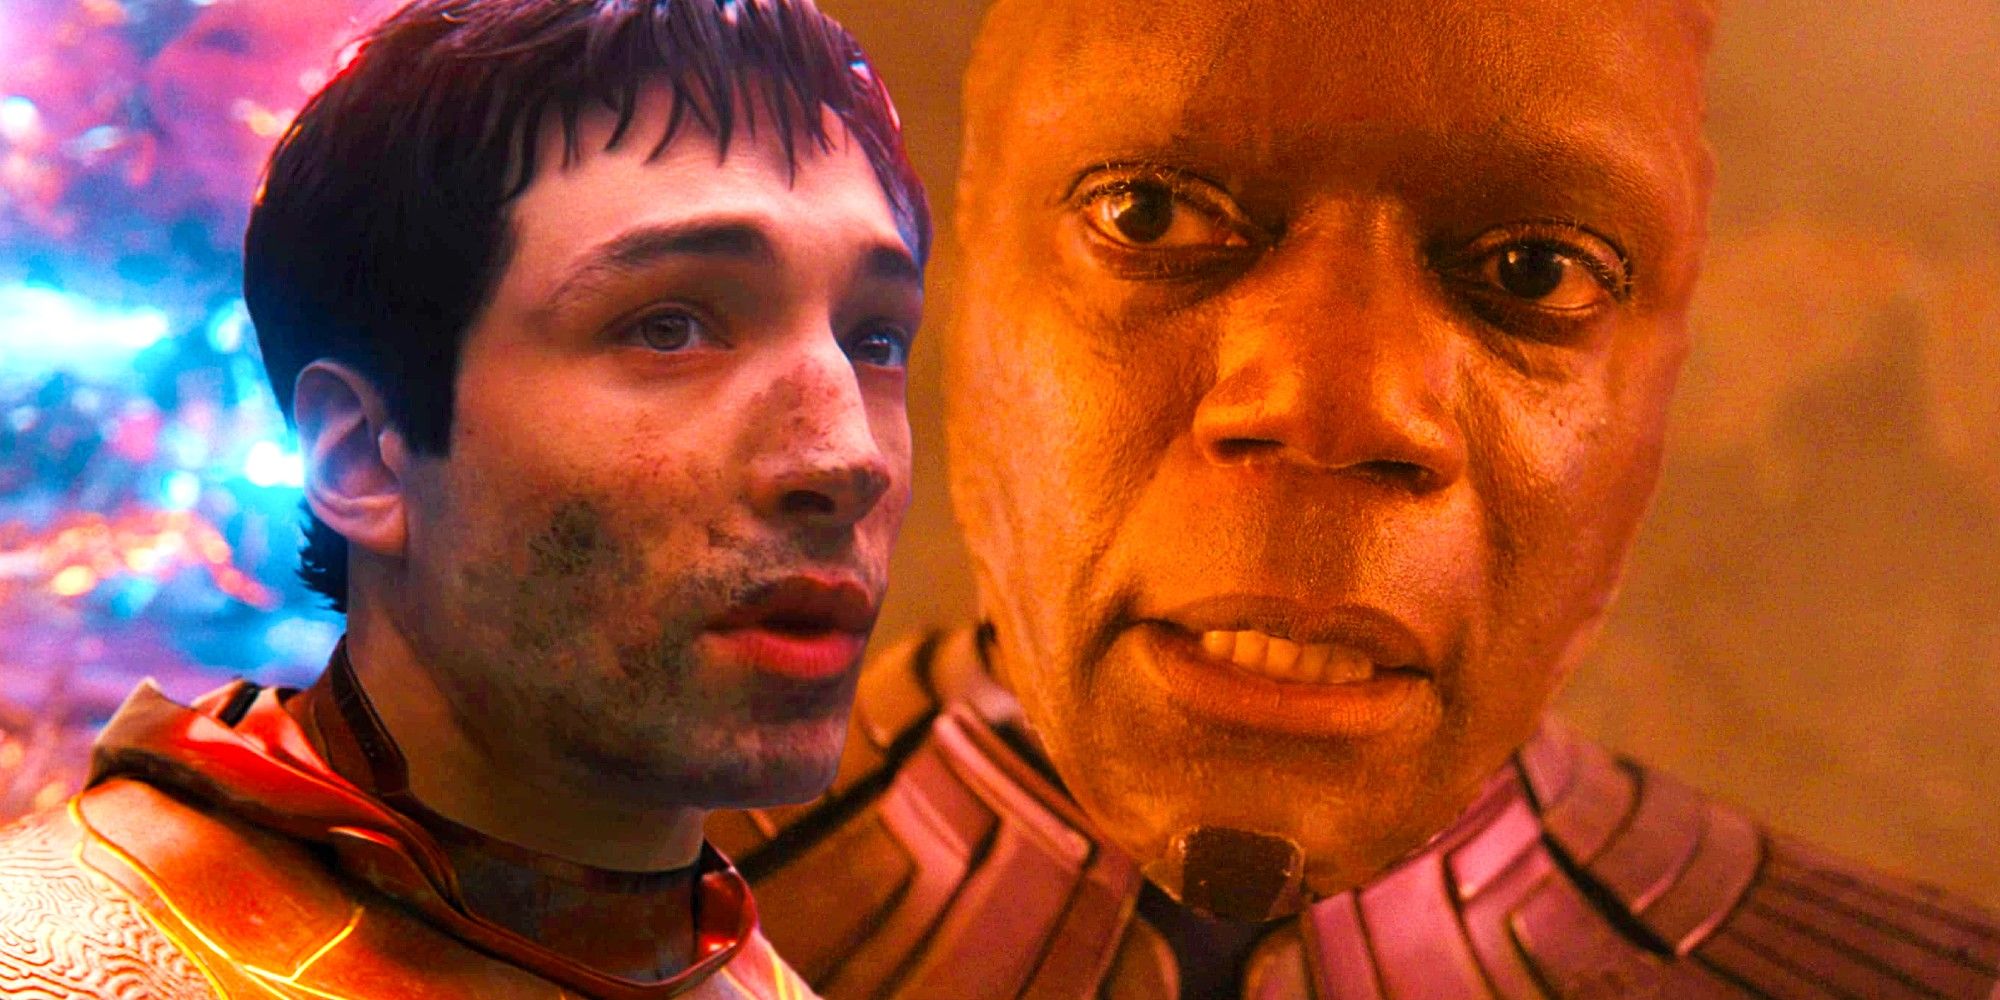 Composite of Ezra Miller As The Flash In The Chronobowl And Chukwudi Iwuji As The HIgh Evolutionary After An Explosion In Guardians of the Galaxy 3